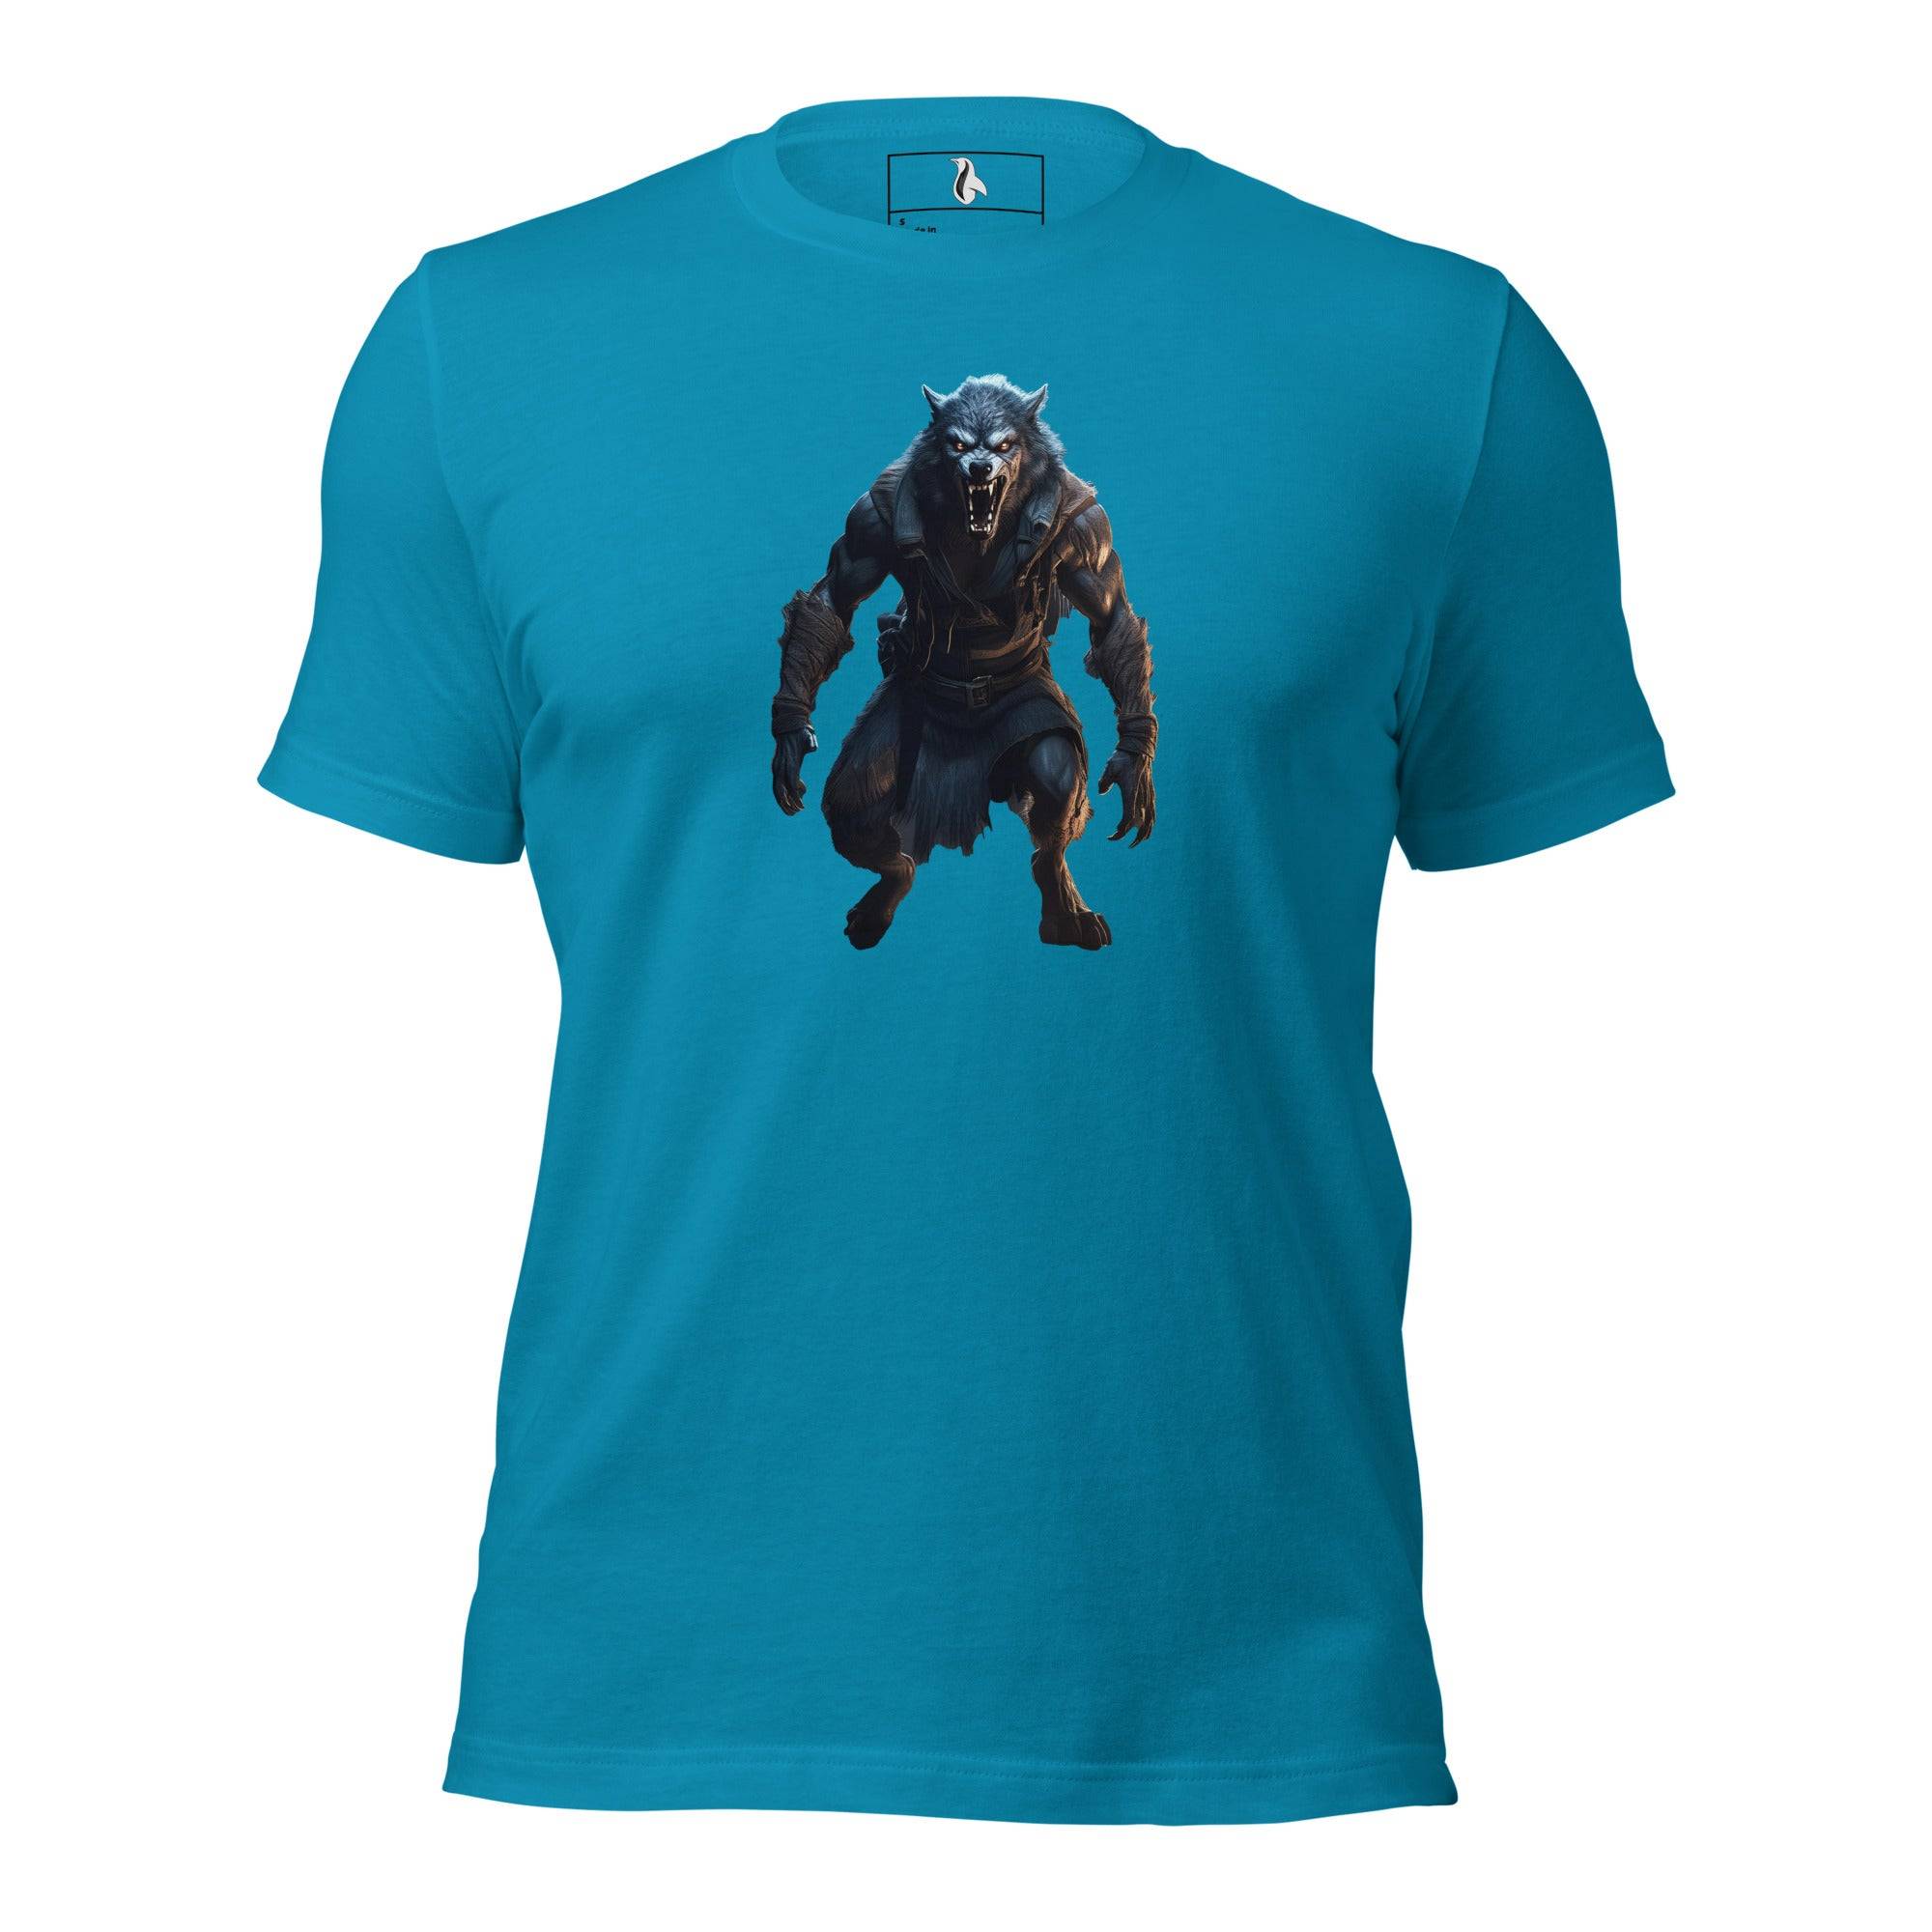 The Monster Squad "Wolfman" Unisex t-shirt